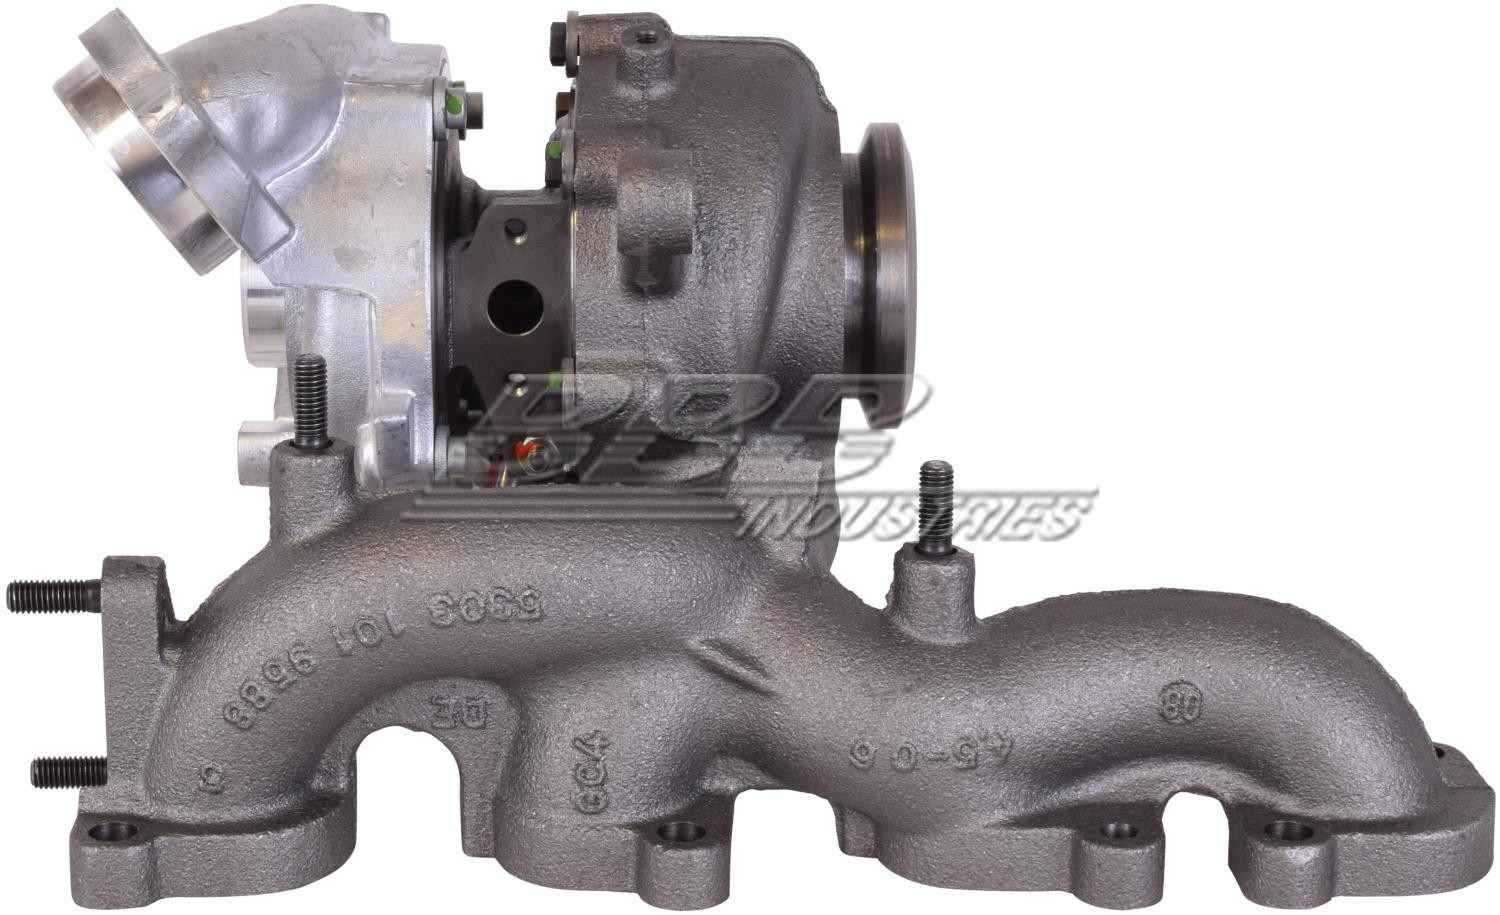 OE-TurboPower Remanufactured Turbocharger  top view frsport D6003